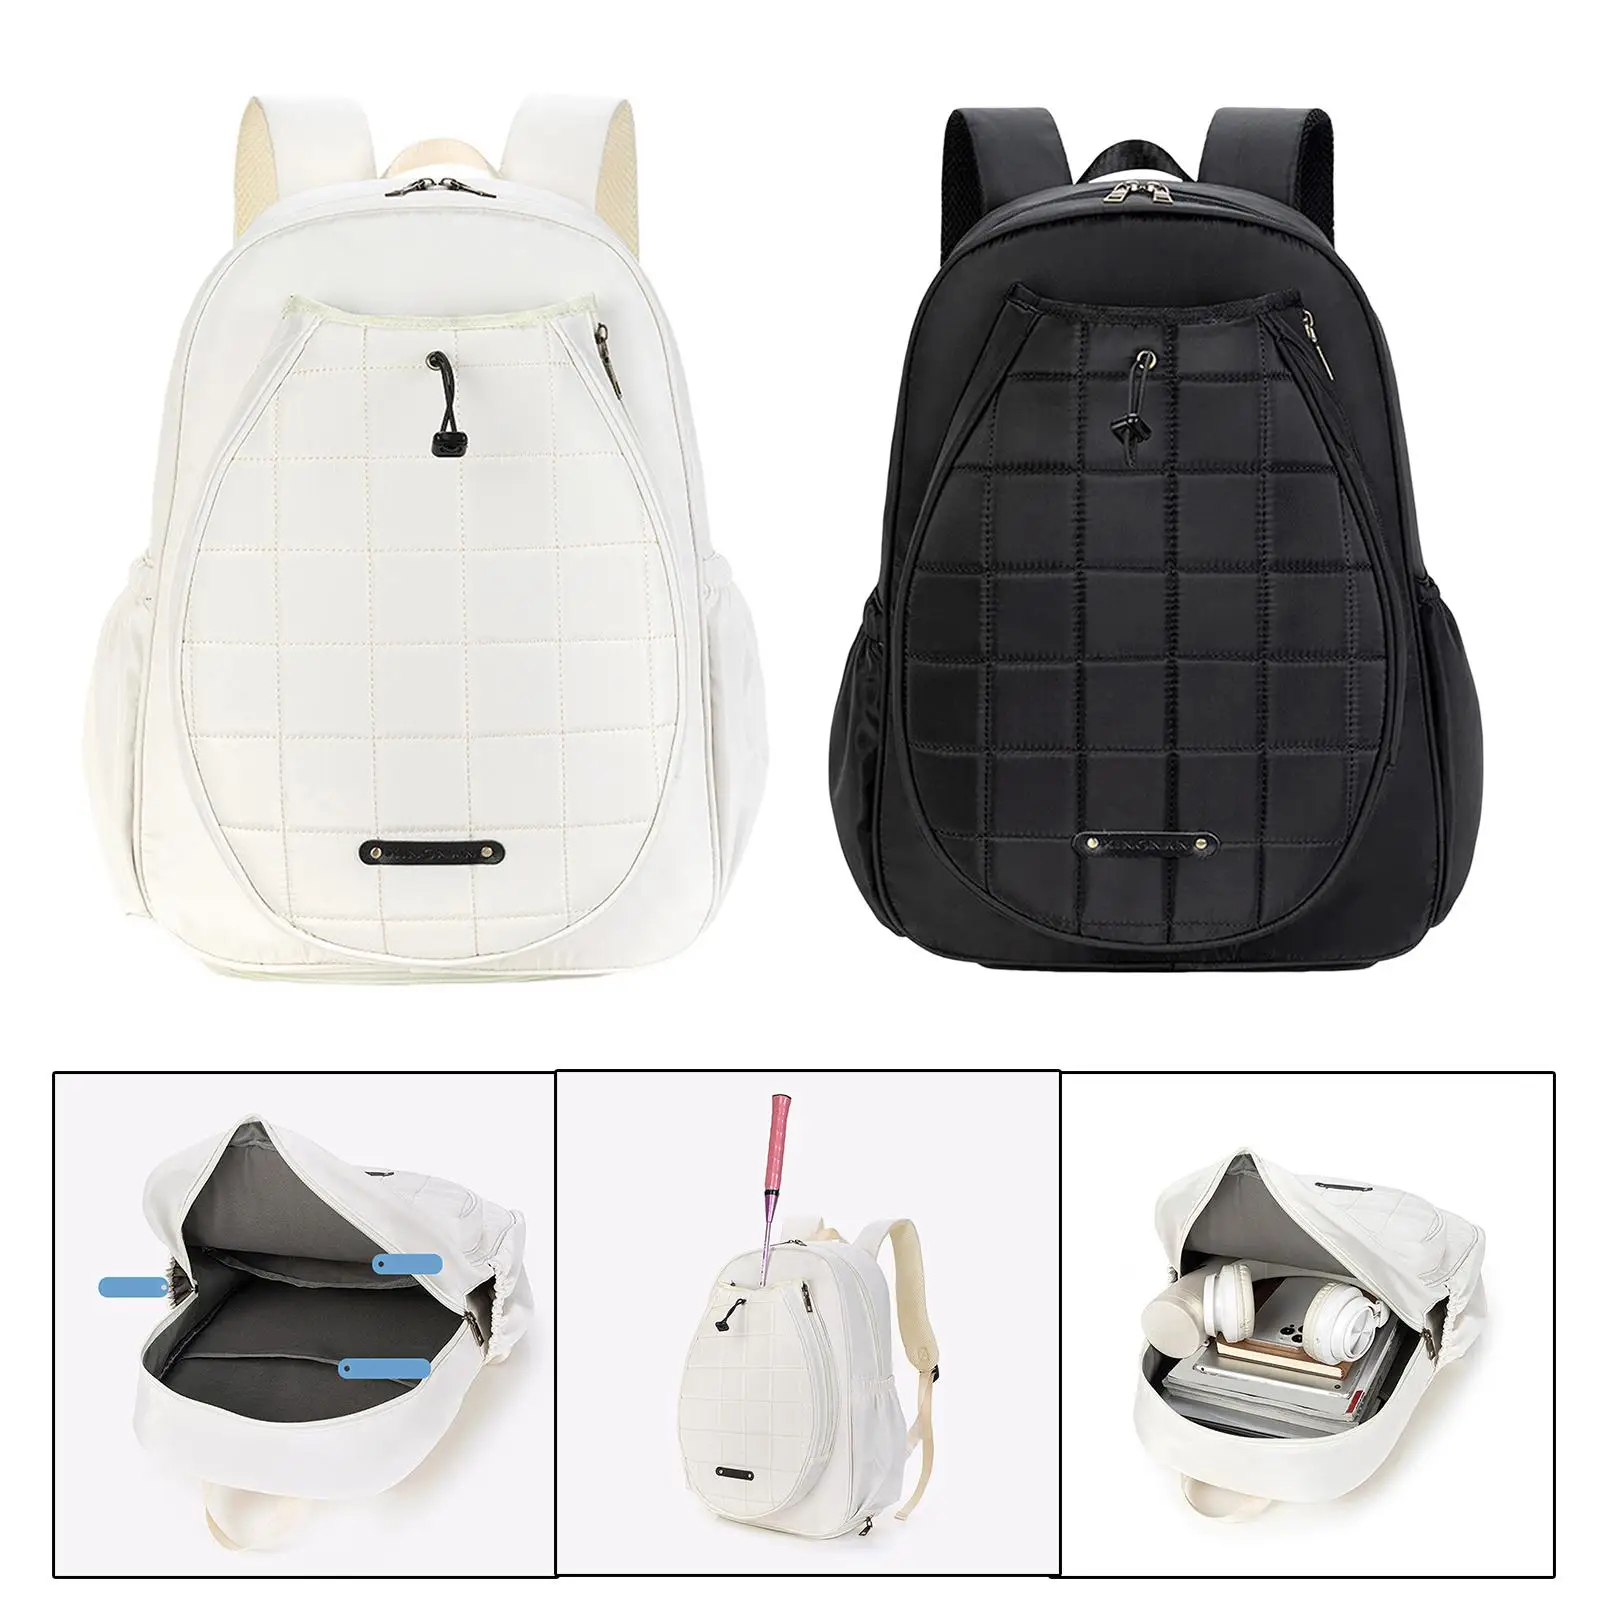 Tennis Backpack Tennis Bag with Shoe Compartment Portable Fitness Sport Large Racket Bag for Squash Racquet Pickleball Paddles